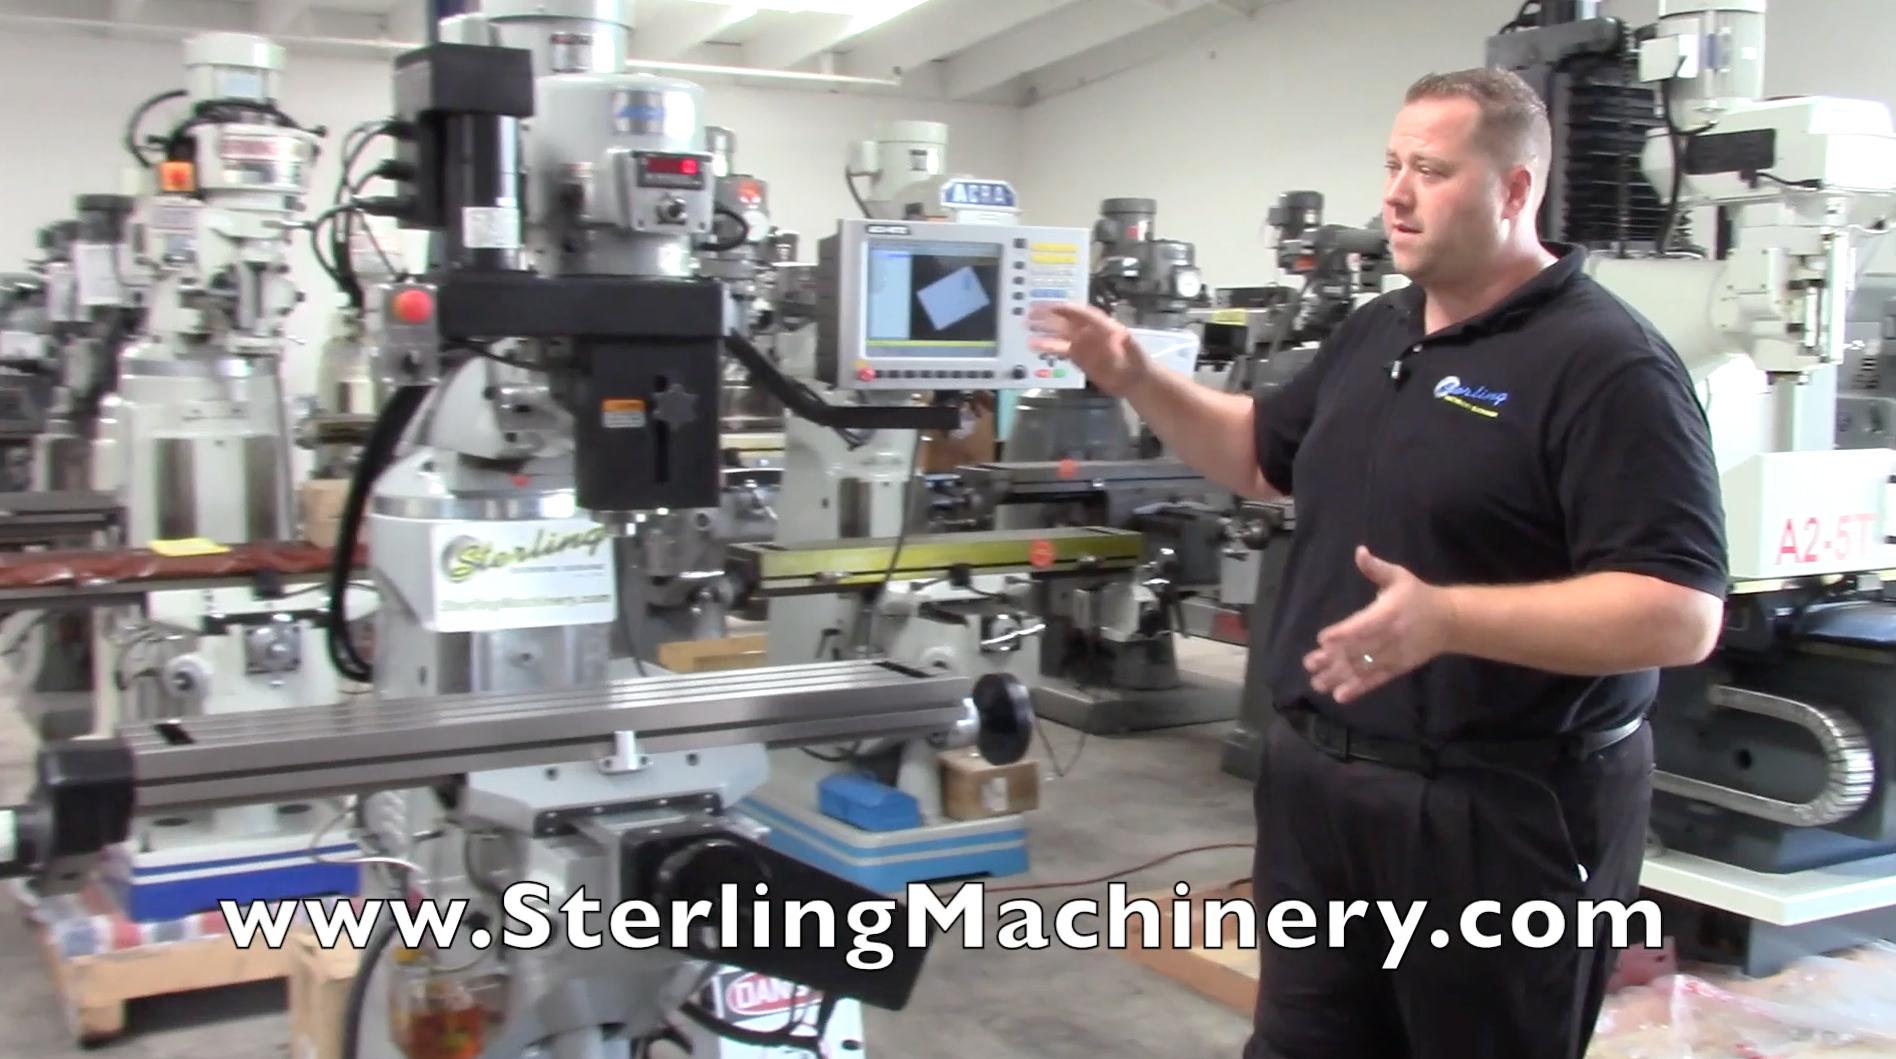 Acra-Sterling Machinery Annual Demo Day 2015 9" x 50" Brand New Acra MillPower CNC Vertical Mill 3 Axis CNC, Mdl. LCM-50 MillPWR 3AX, Milled Oil Grooves, Hard Chrome Ways, Hand Scraped Saddle, Meechanite Casting, ABEC-7 Spindle Bearings, One Shot Lube System,-01